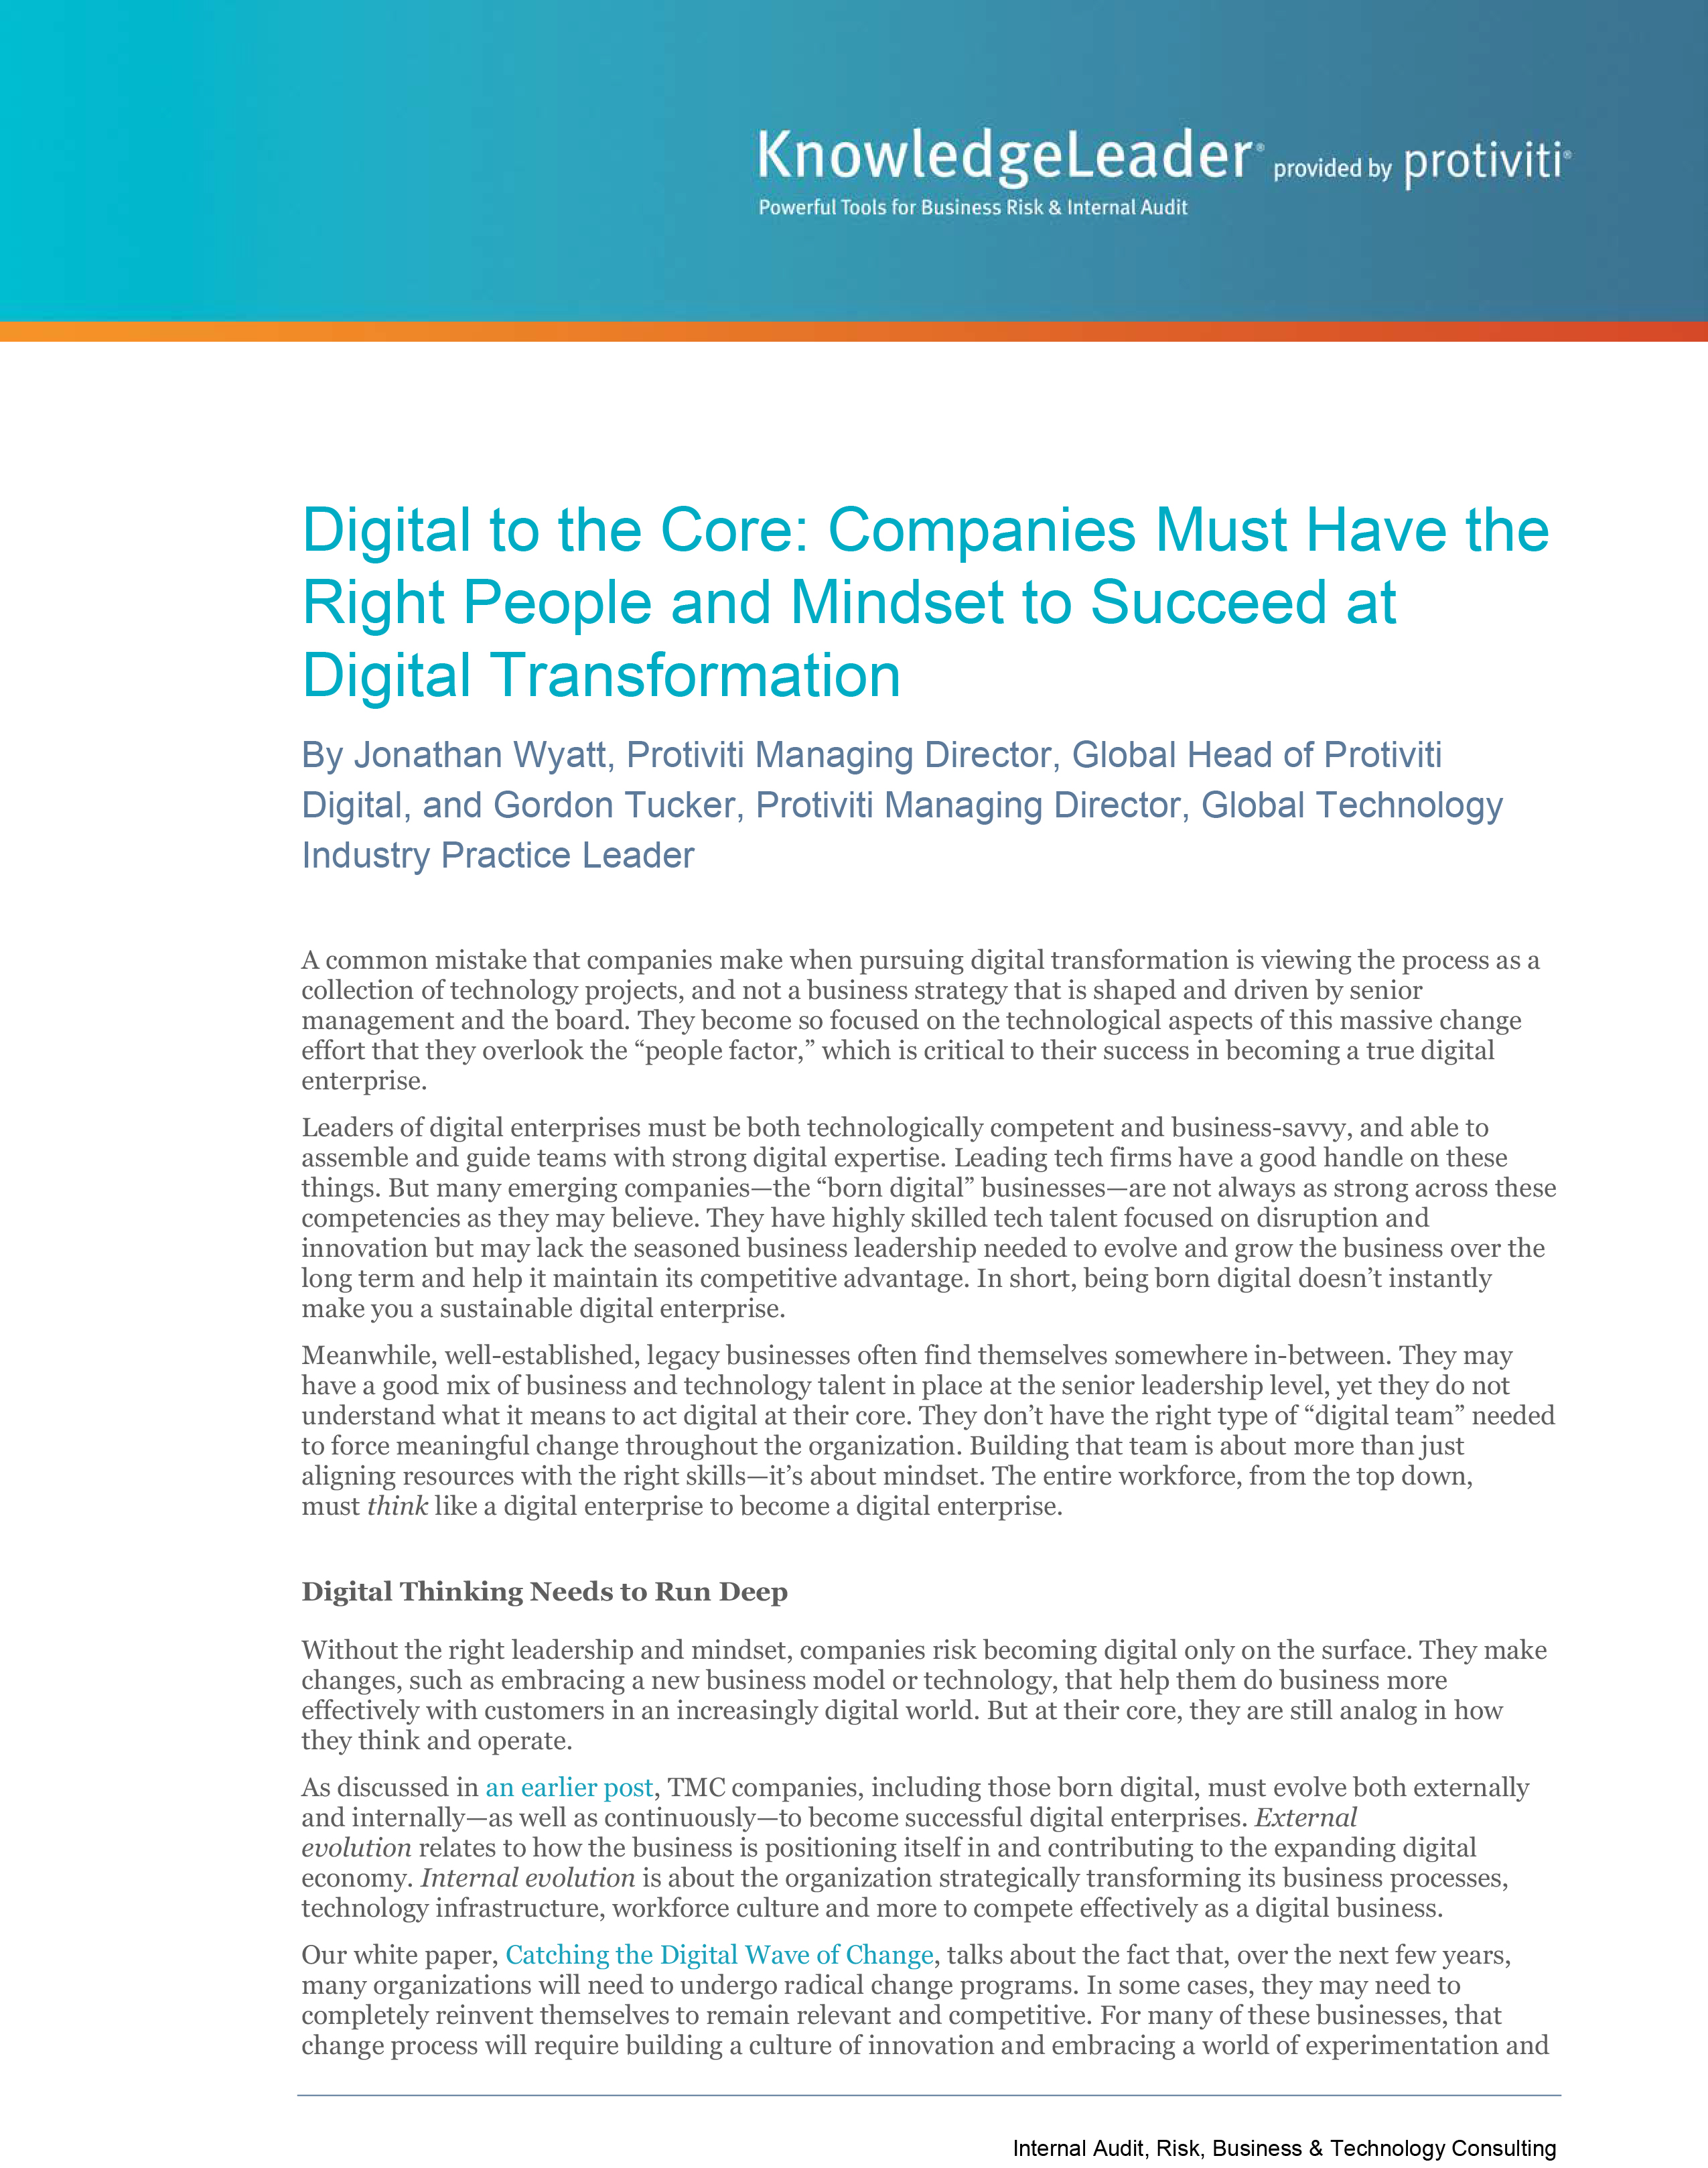 Screenshot of the first page of Digital to the Core - Companies Must Have the Right People and Mindset to Succeed at Digital Transformation